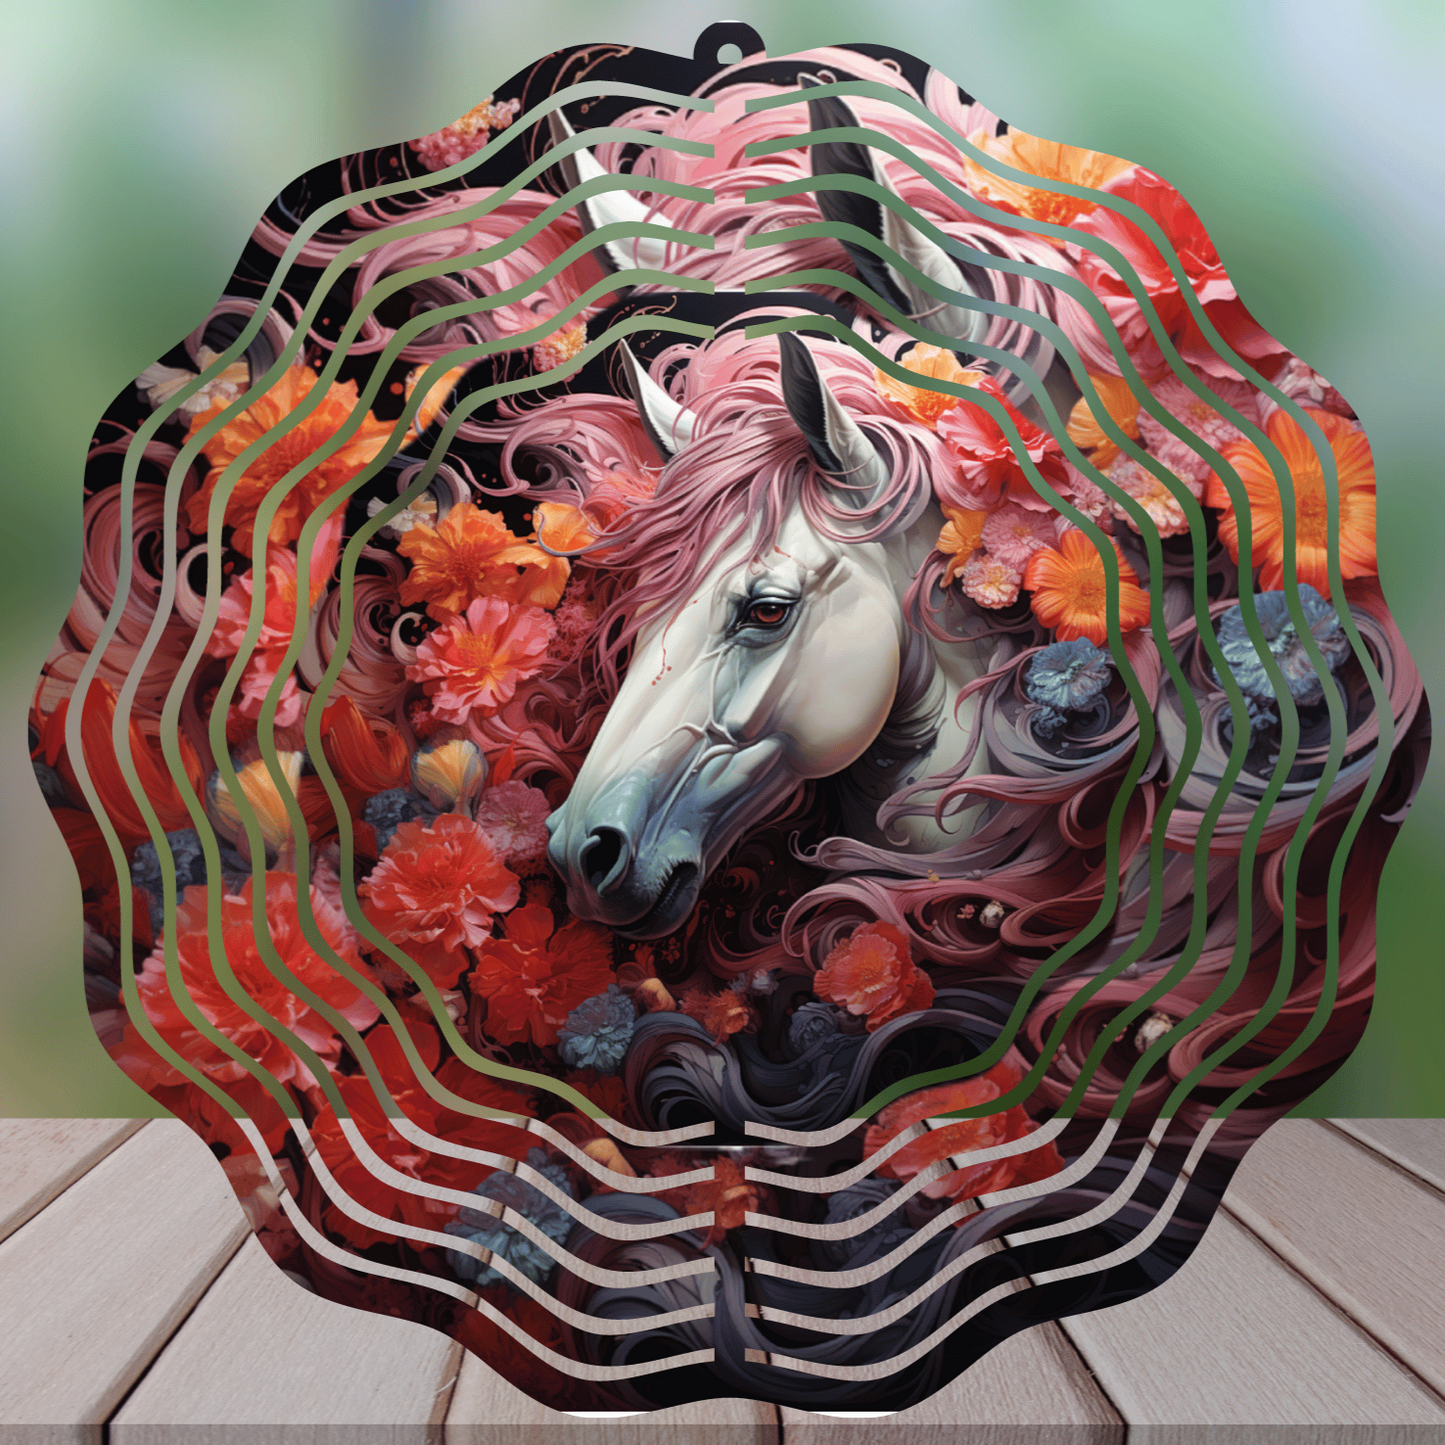 Magestic Horse 8" Round Handmade Sublimated Wind Spinner - Unique Garden Decor